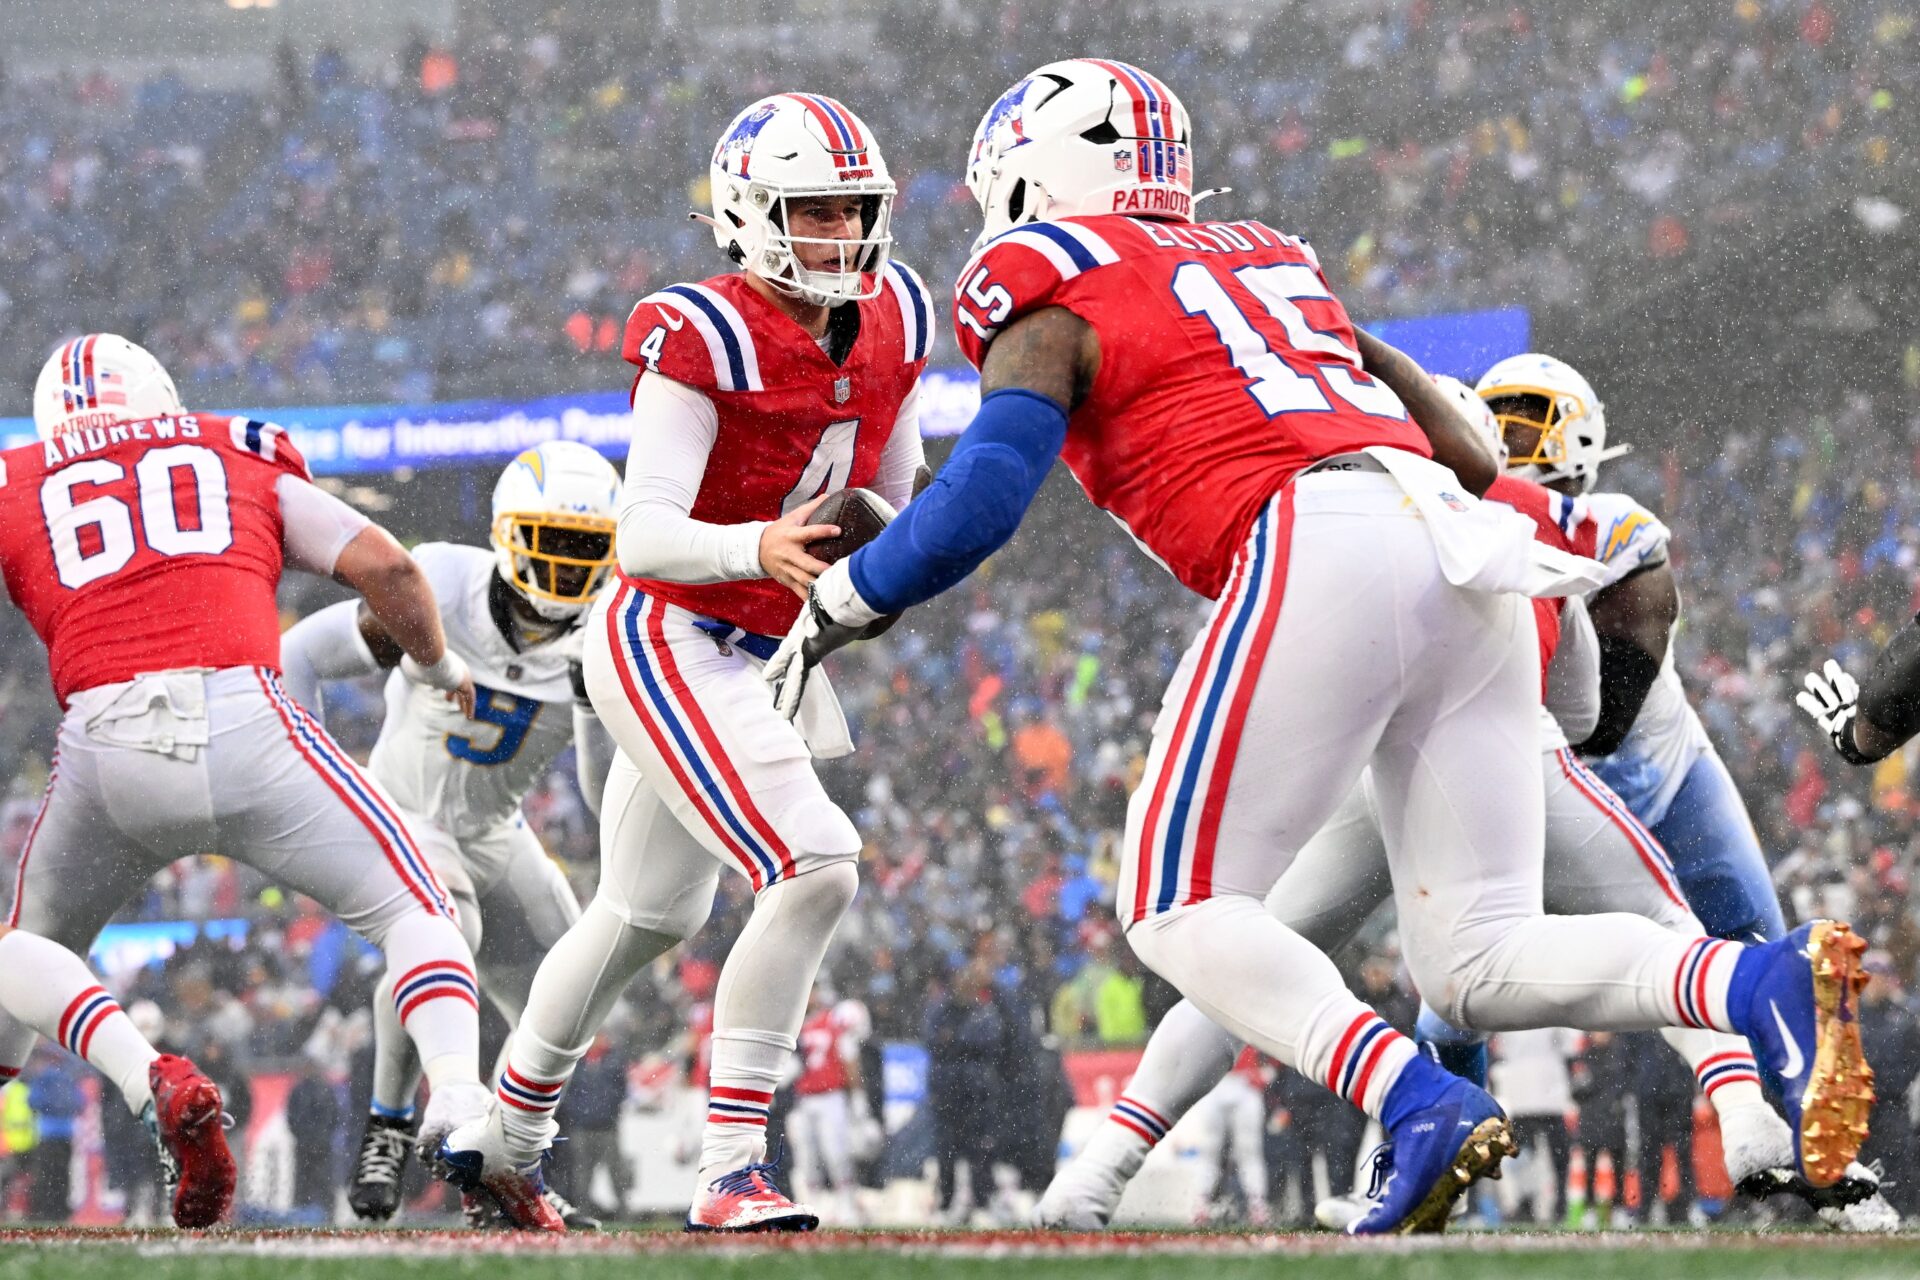 New England Patriots quarterback Bailey Zappe (4) hands the ball off to running back Ezekiel Elliott (15) during the second half of a game against the Los Angeles Chargers at Gillette Stadium.